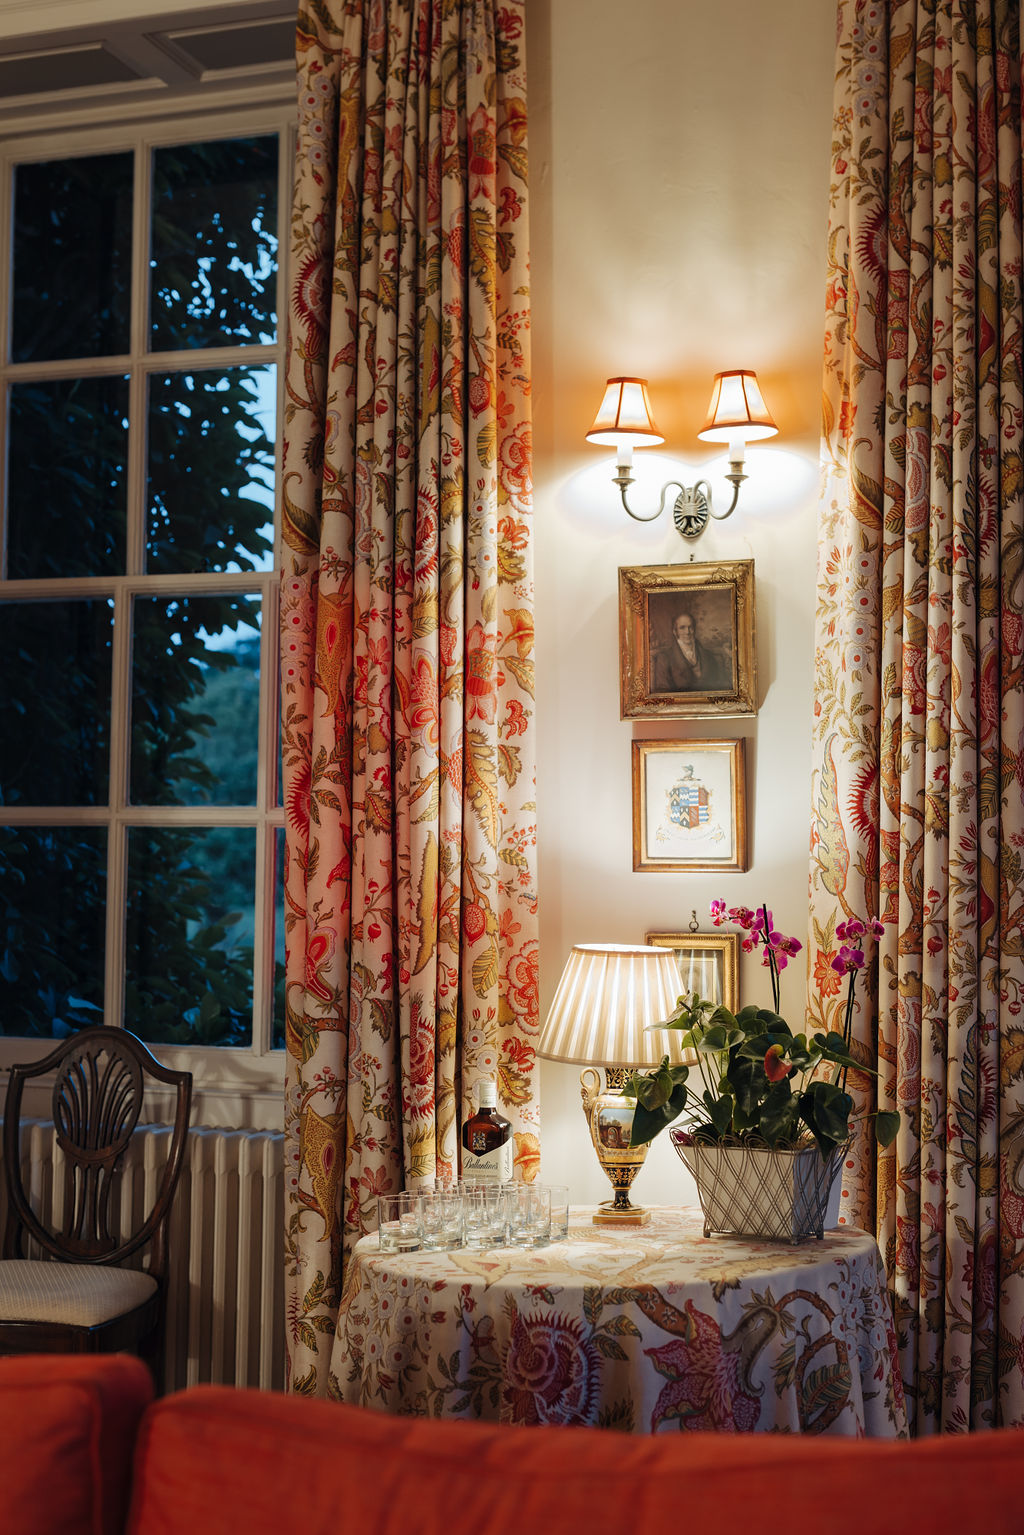 A vignette of a small drawing room at dusk with floor length floral curtains open at a large set of Georgian sash windows. In front of the window is a side table covered in a matching tablcoth on which is a vase of orchids and a lit table lamp